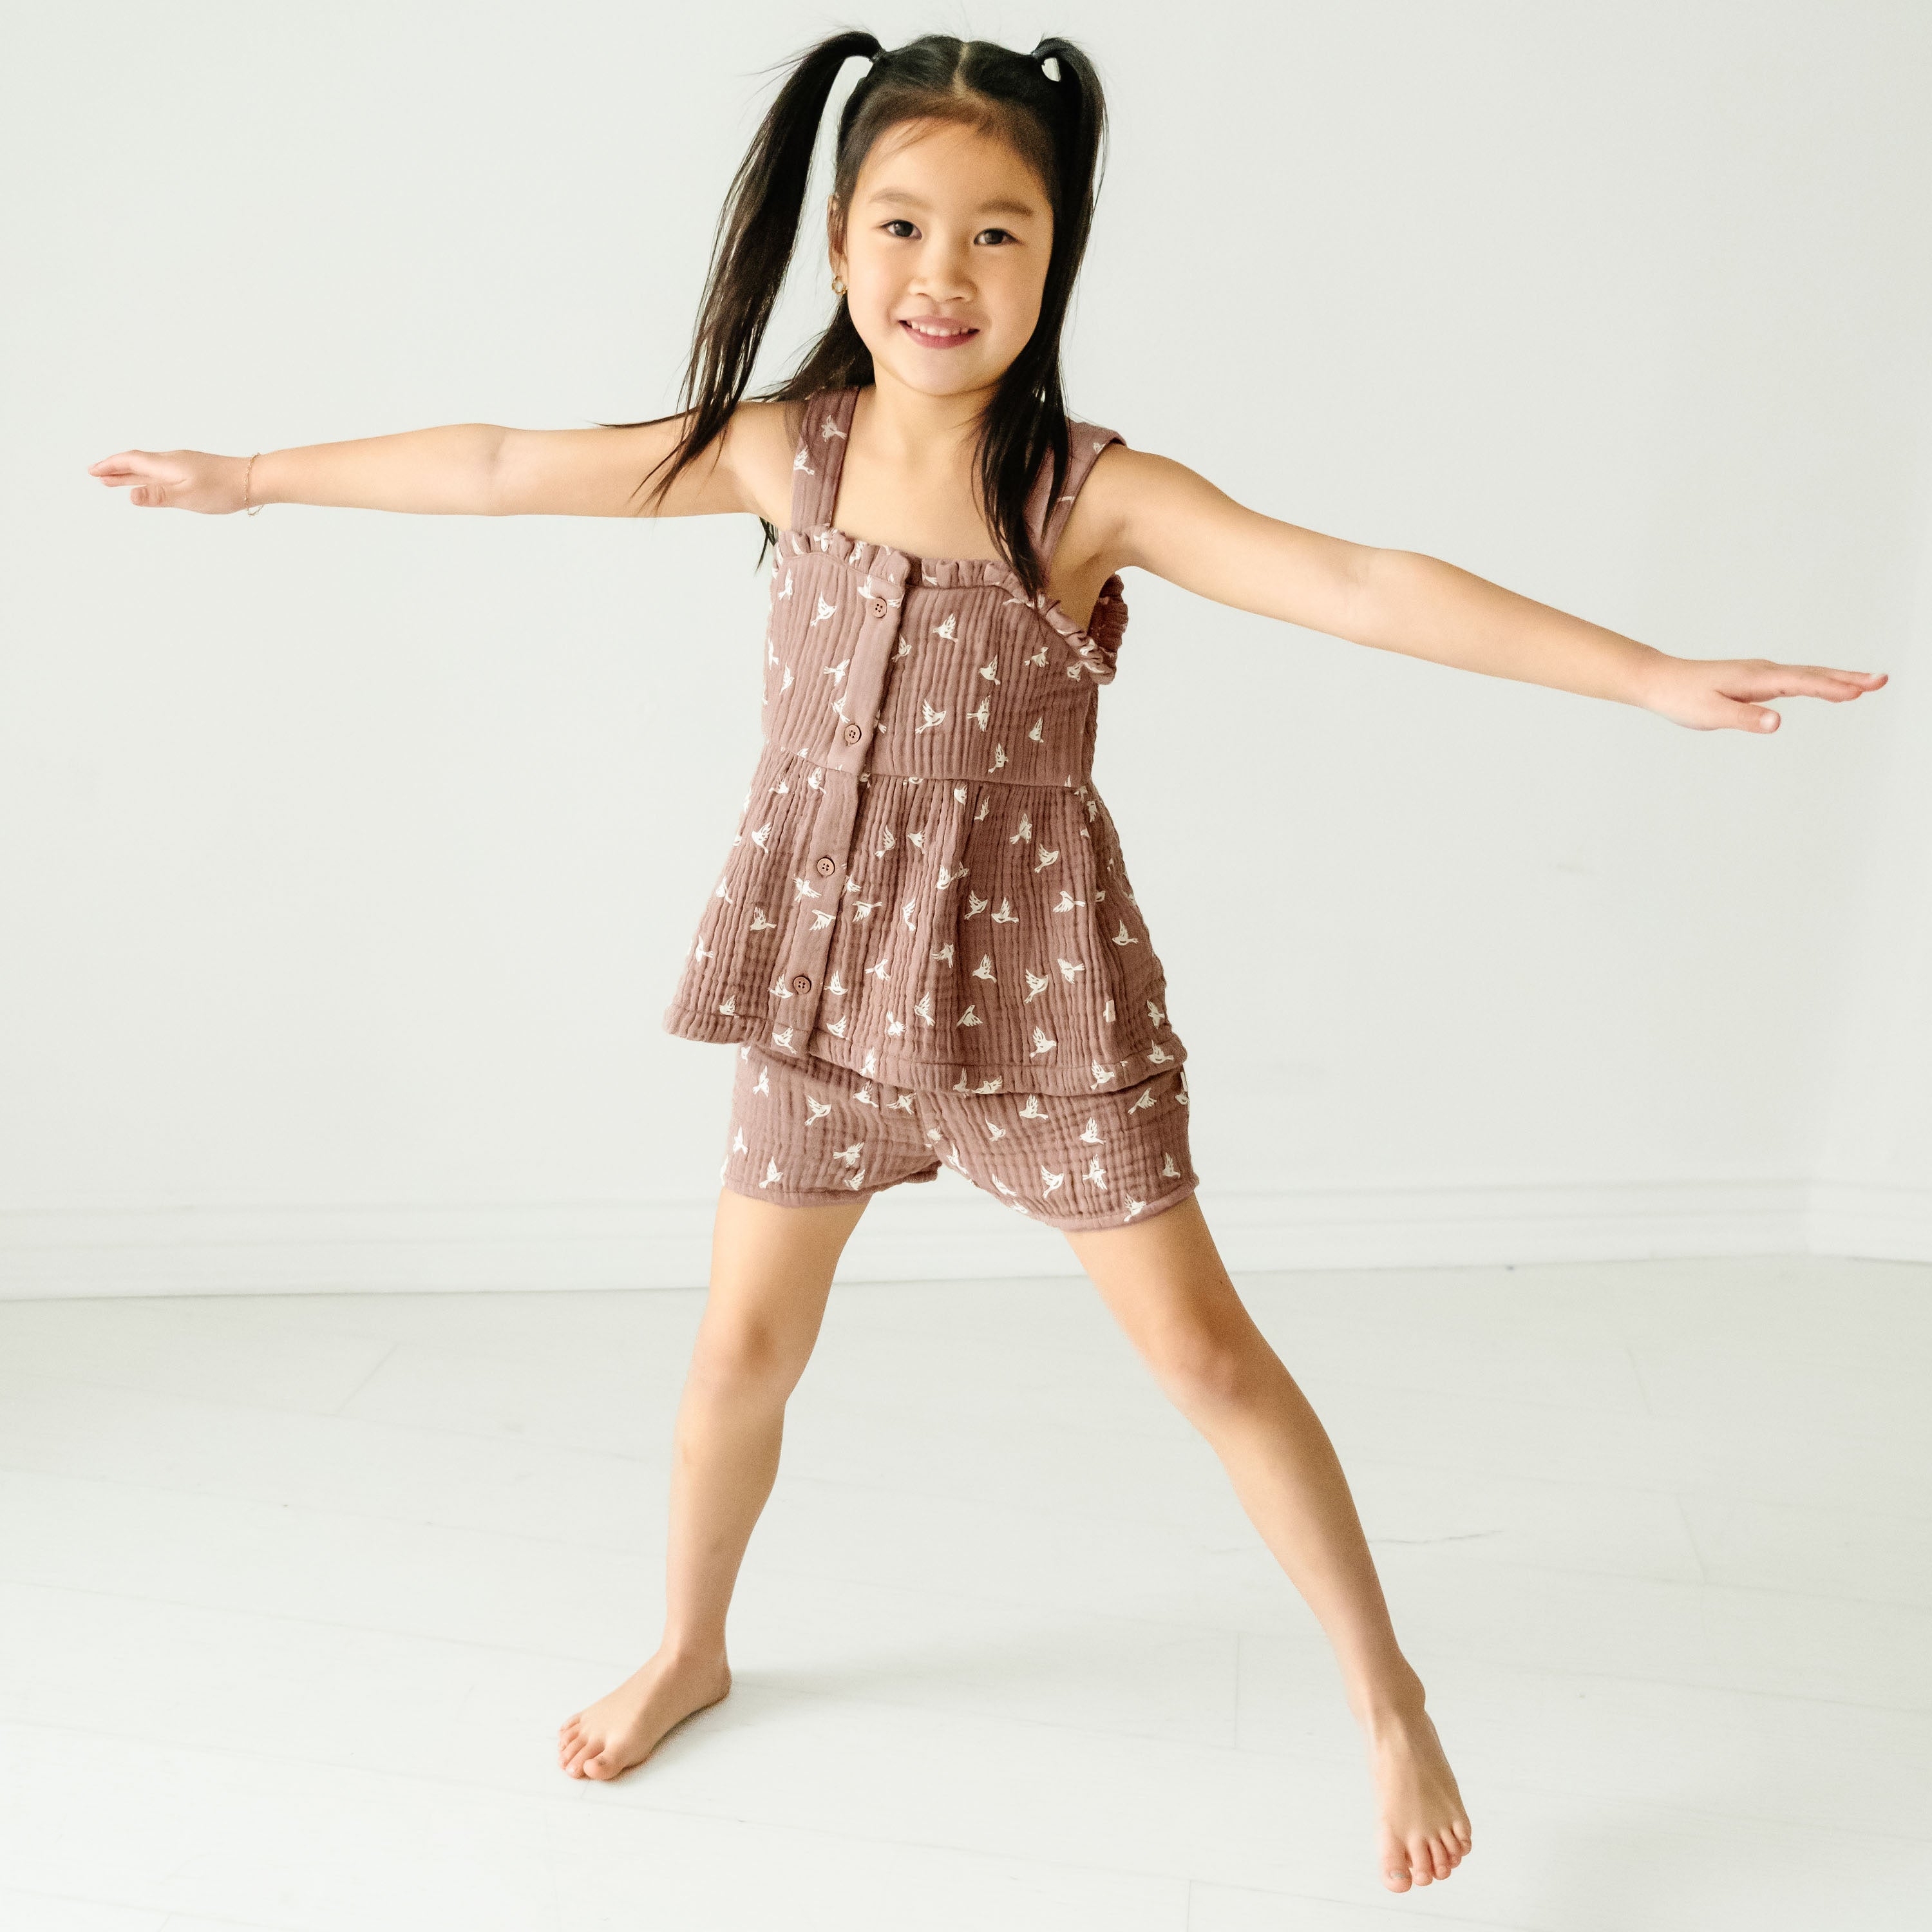 A young girl with ponytails, wearing a Makemake Organics Organic Muslin Peplum Top and Shorts Set - Flock, joyfully spreads her arms wide while standing barefoot in a brightly lit, white studio room.